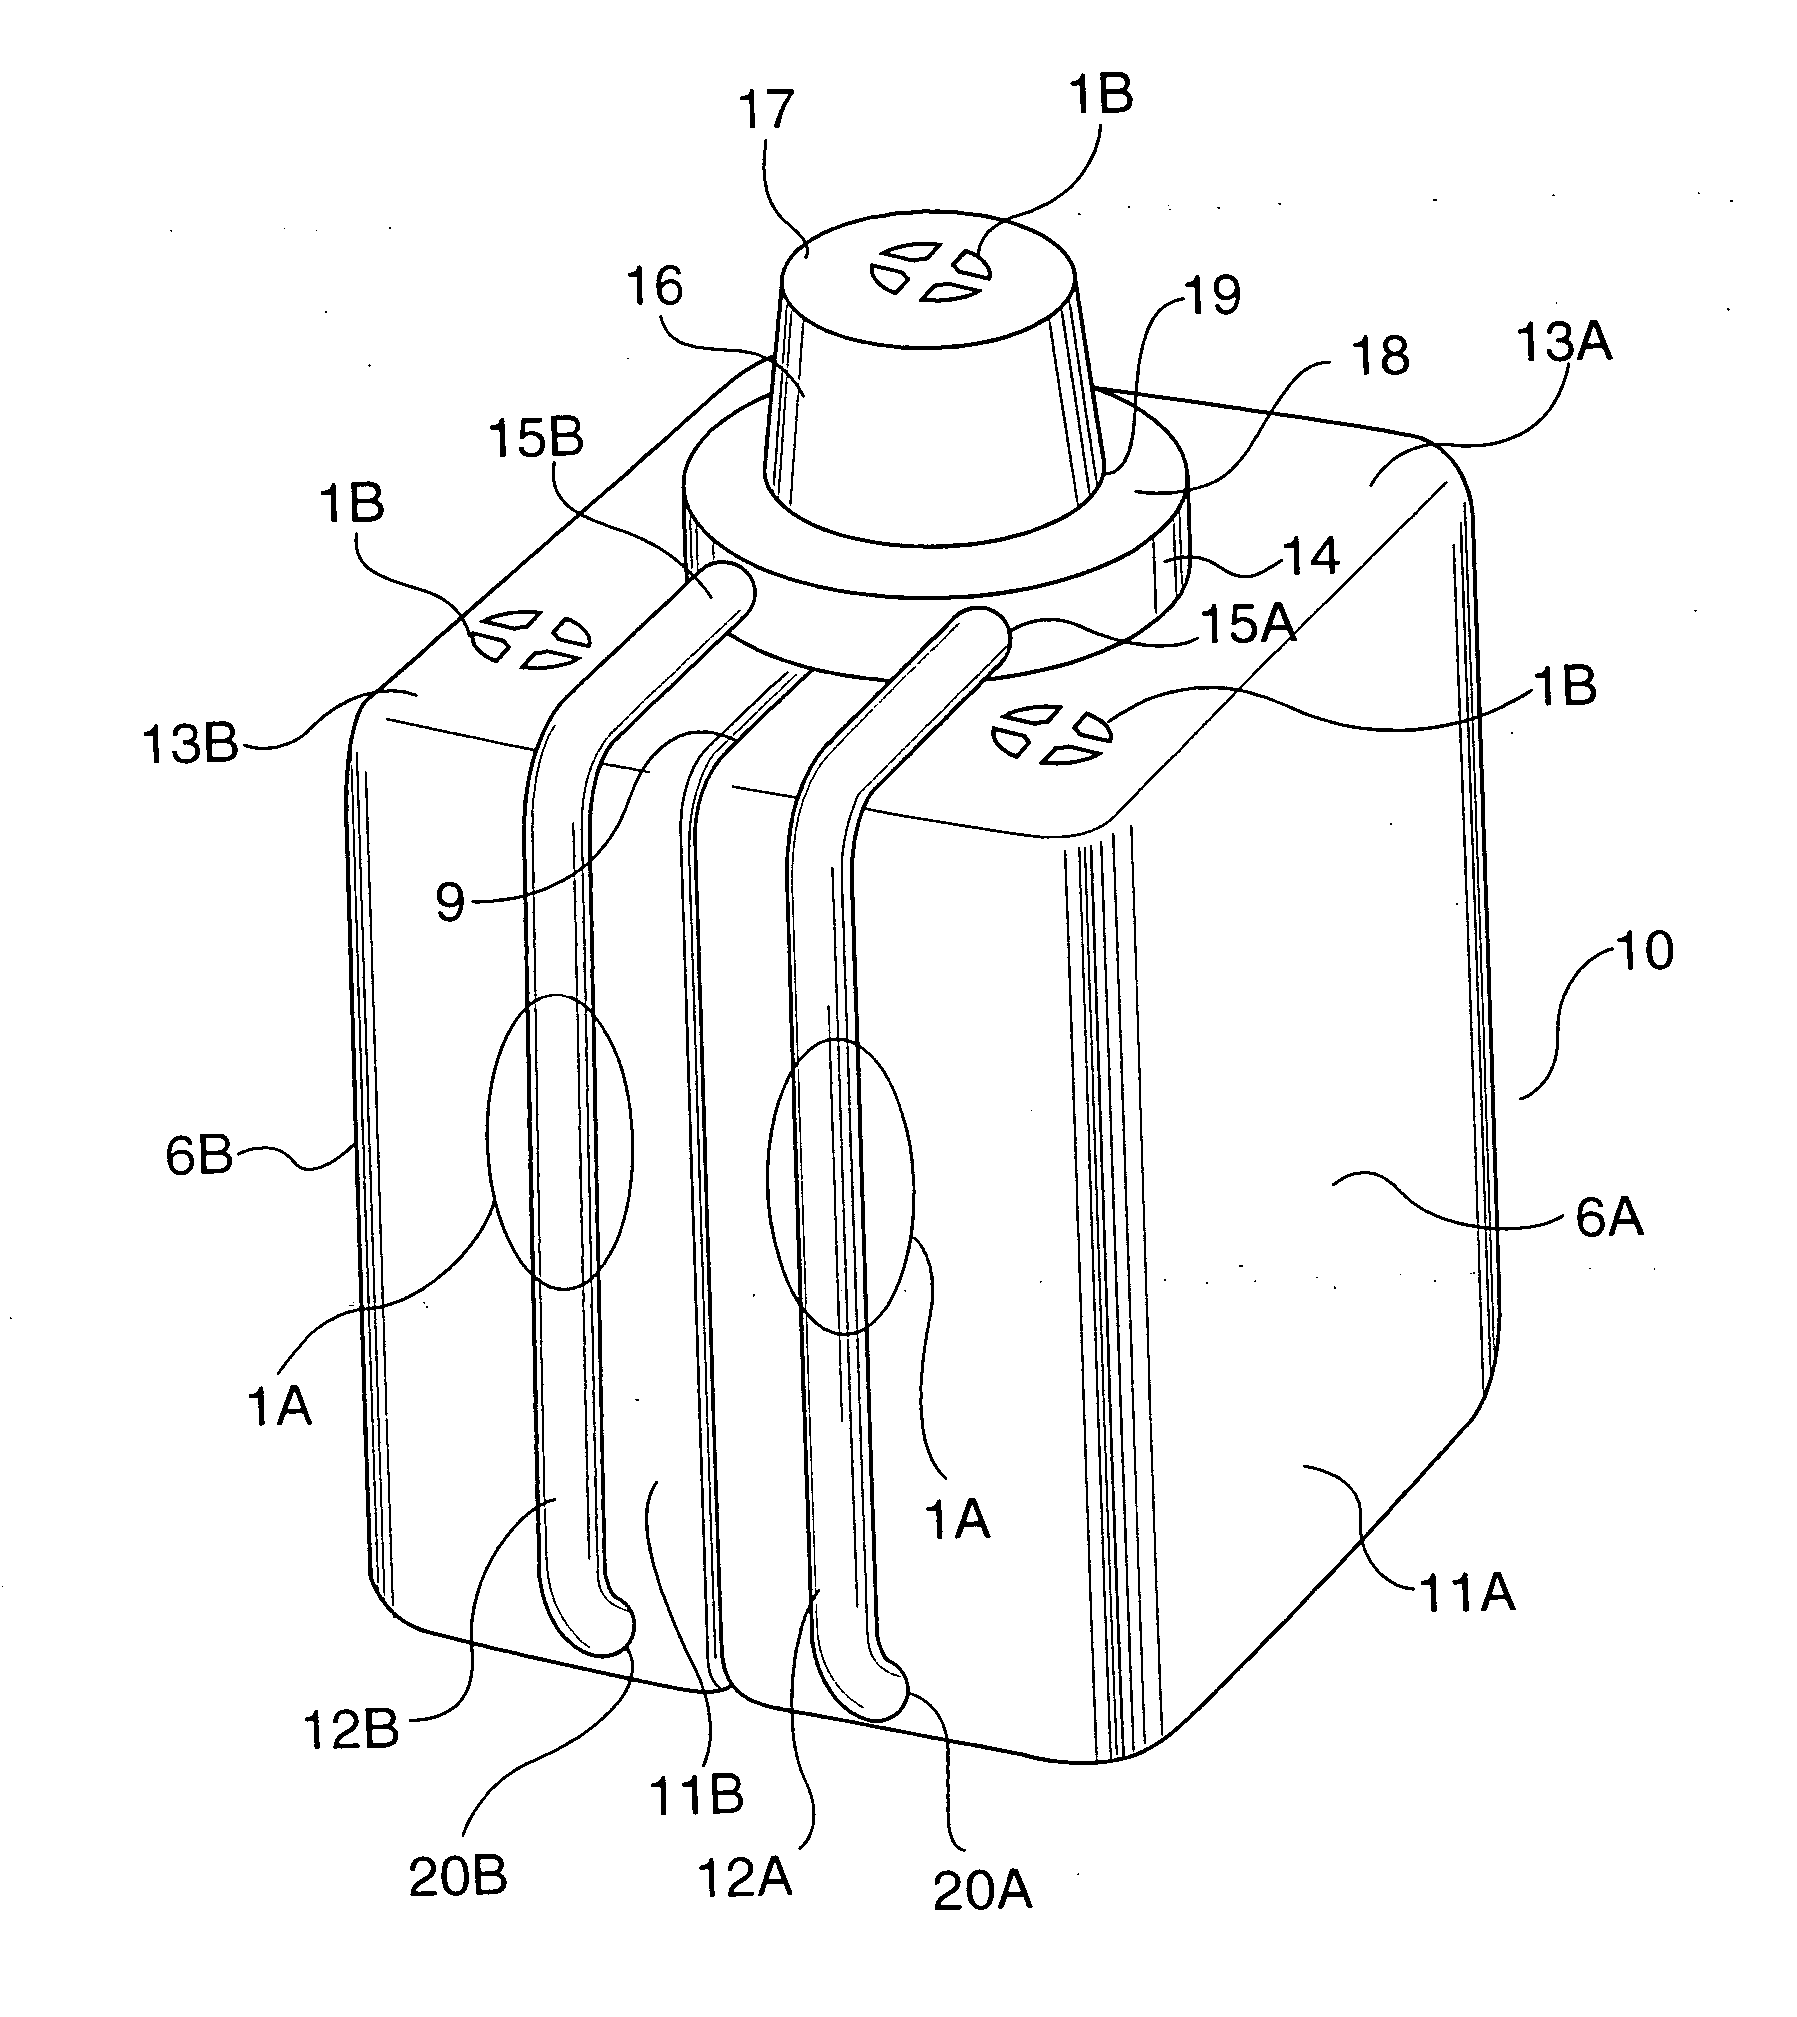 Multi-compartment storage and delivery containers and delivery system for microencapsulated fragrances